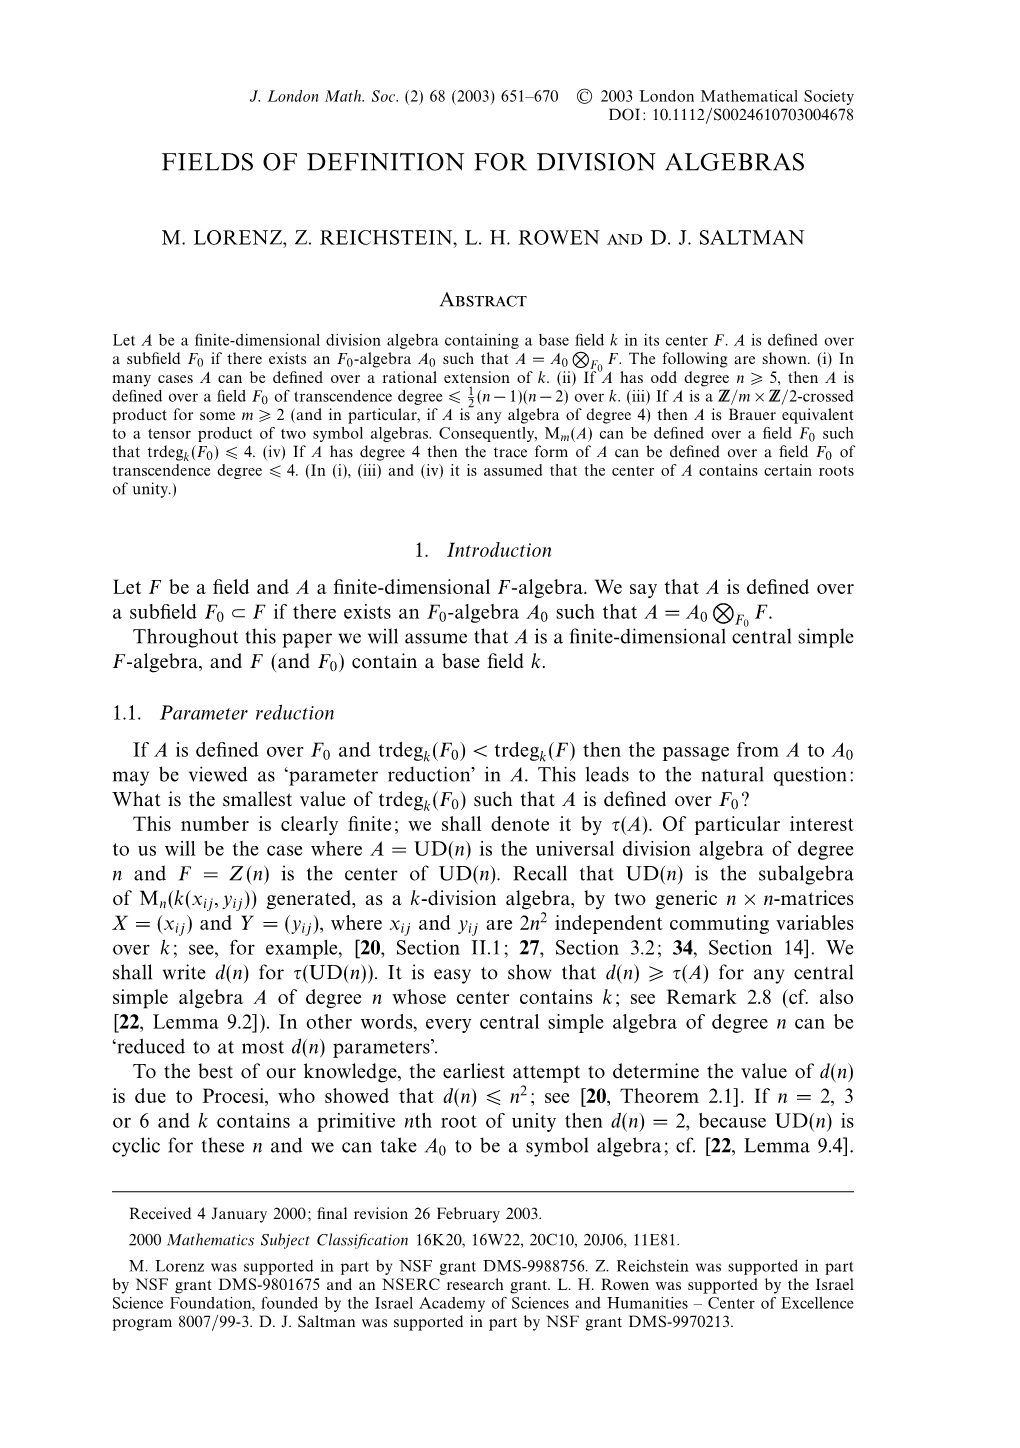 Fields of Definition for Division Algebras